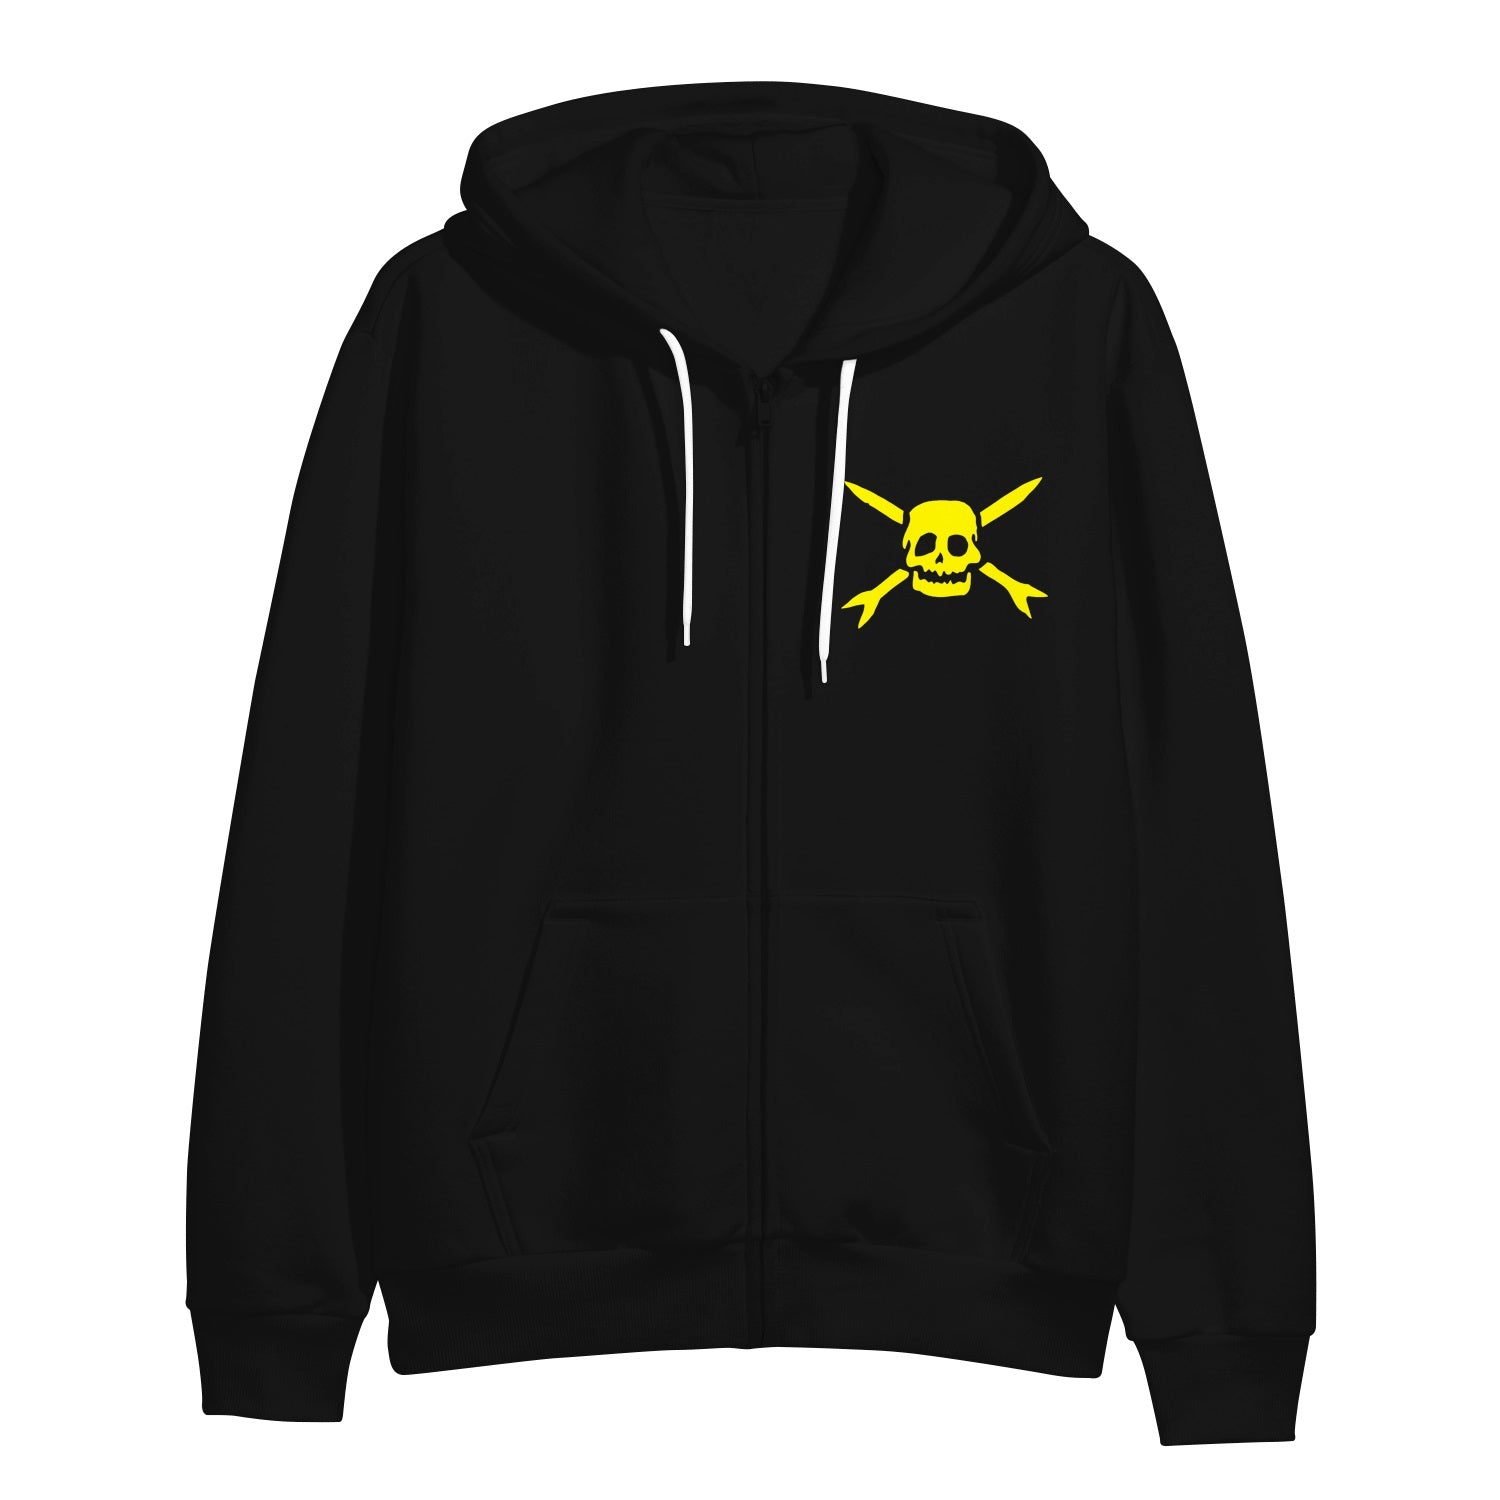 Image of the front of a black zip up sweatshirt against a white background. The left chest has the teenage bottlerocket logo in yellow- a skull head with cross arrows. The hoodie has white strings. 